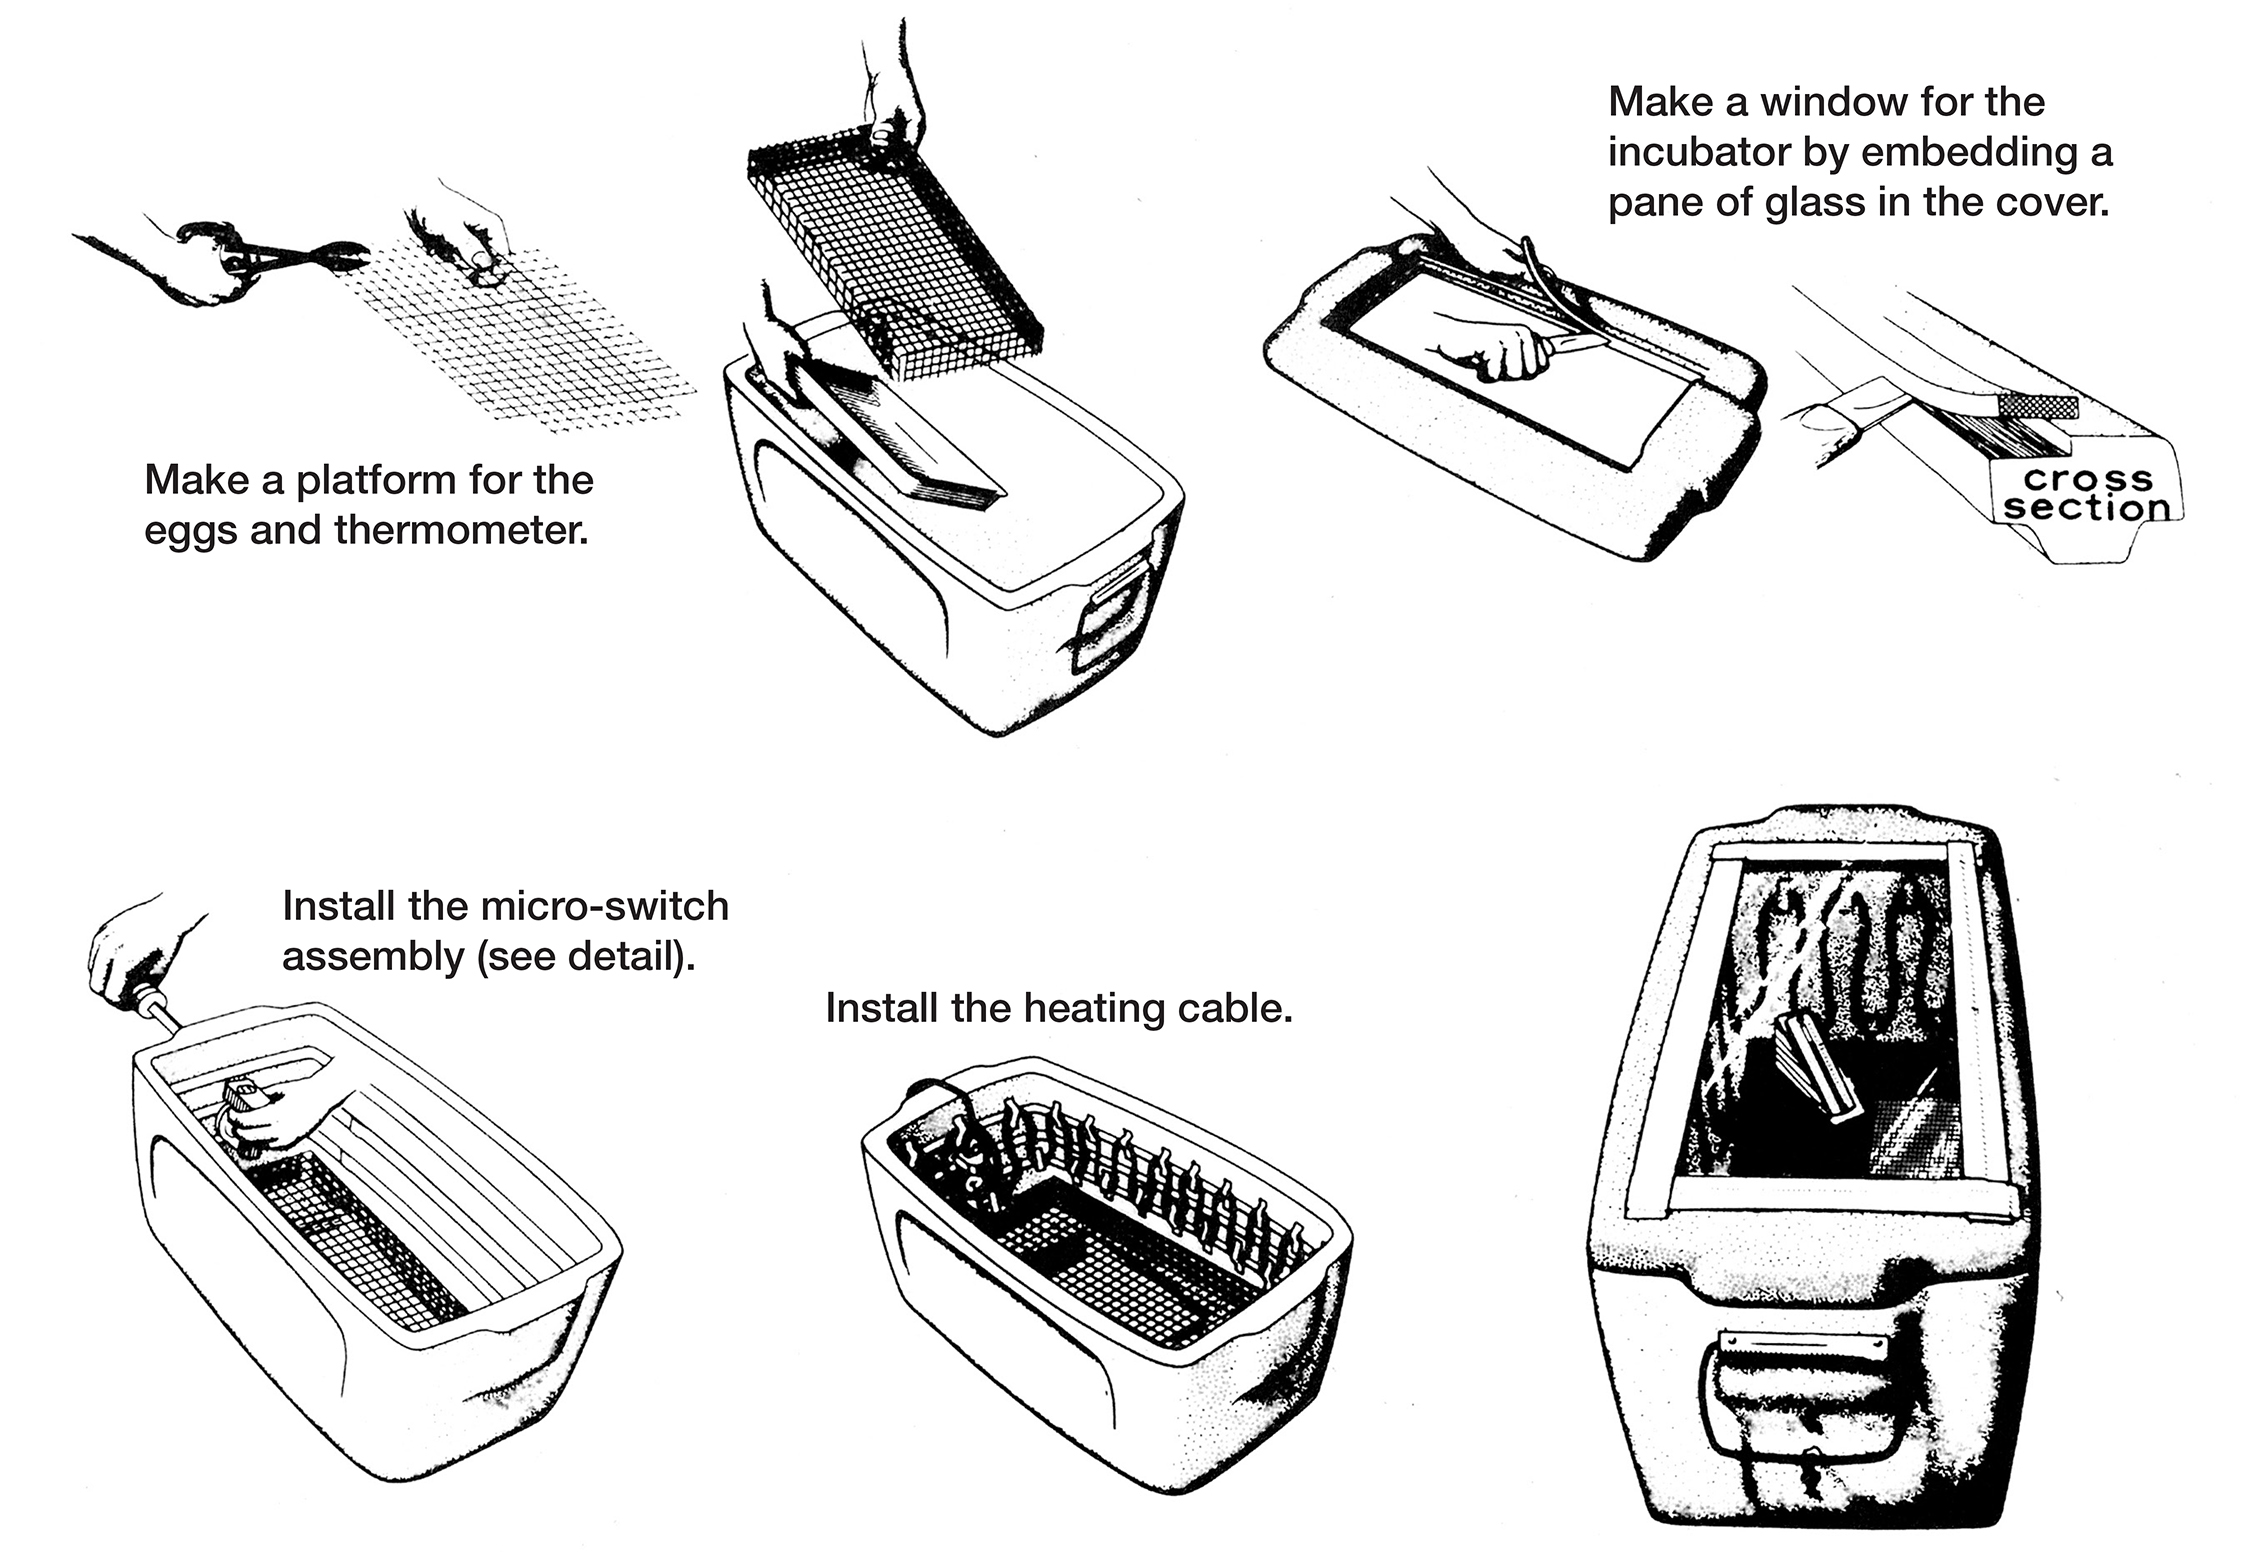 Steps for making a styrofoam incubator: Make a platform for the eggs and thermometer with welded wire hardware cloth over the cake tin. Make a window for the incubator by embedding a pane of glass in the cover. Install the micro-switch assembly. Install the heating cable.